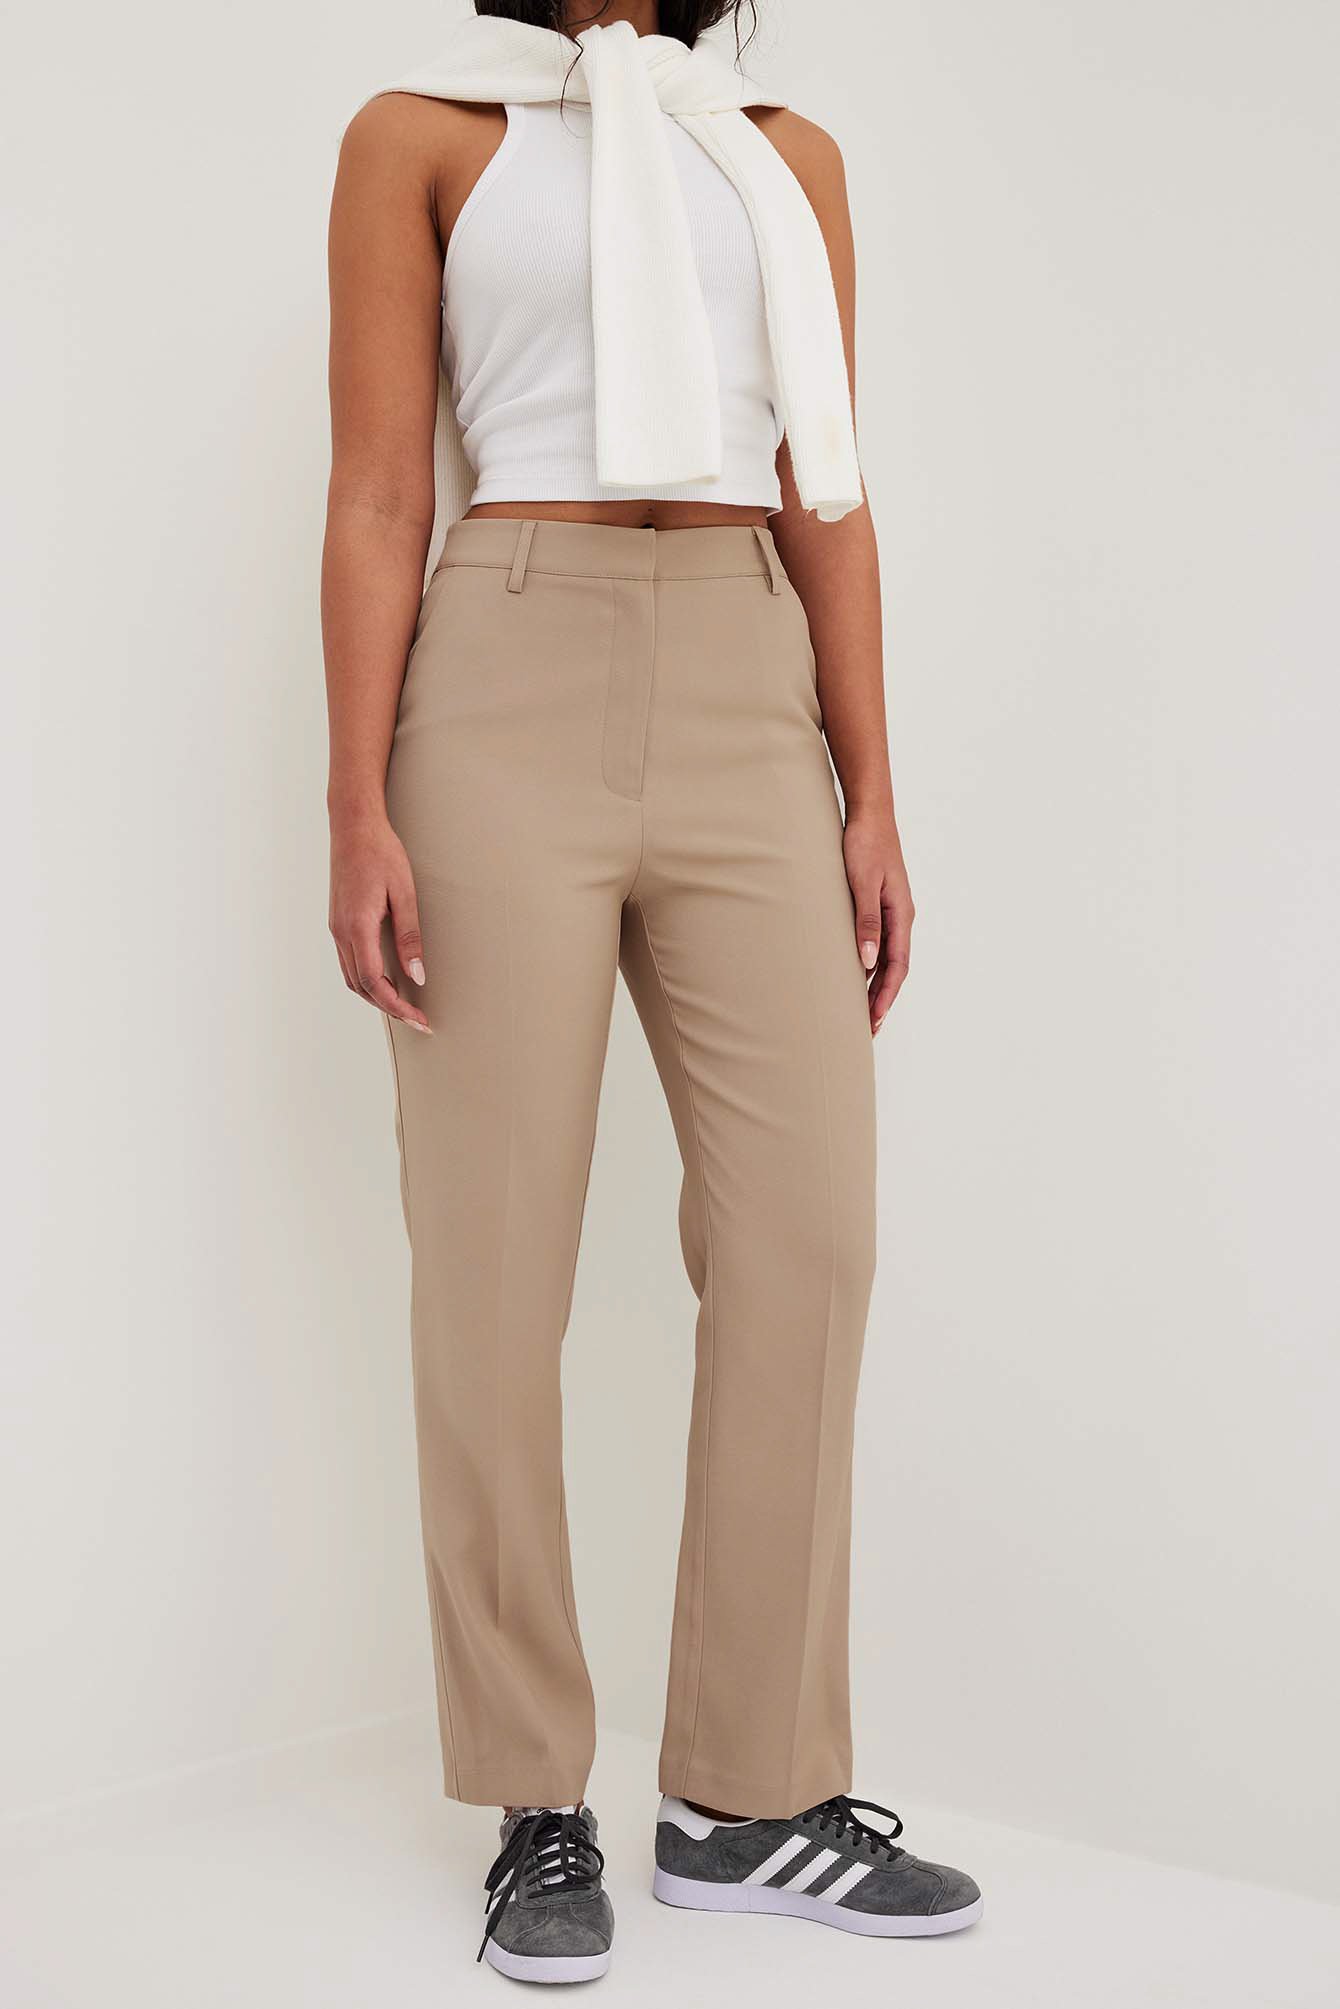 What do you think about ankle length pants for men? - Quora